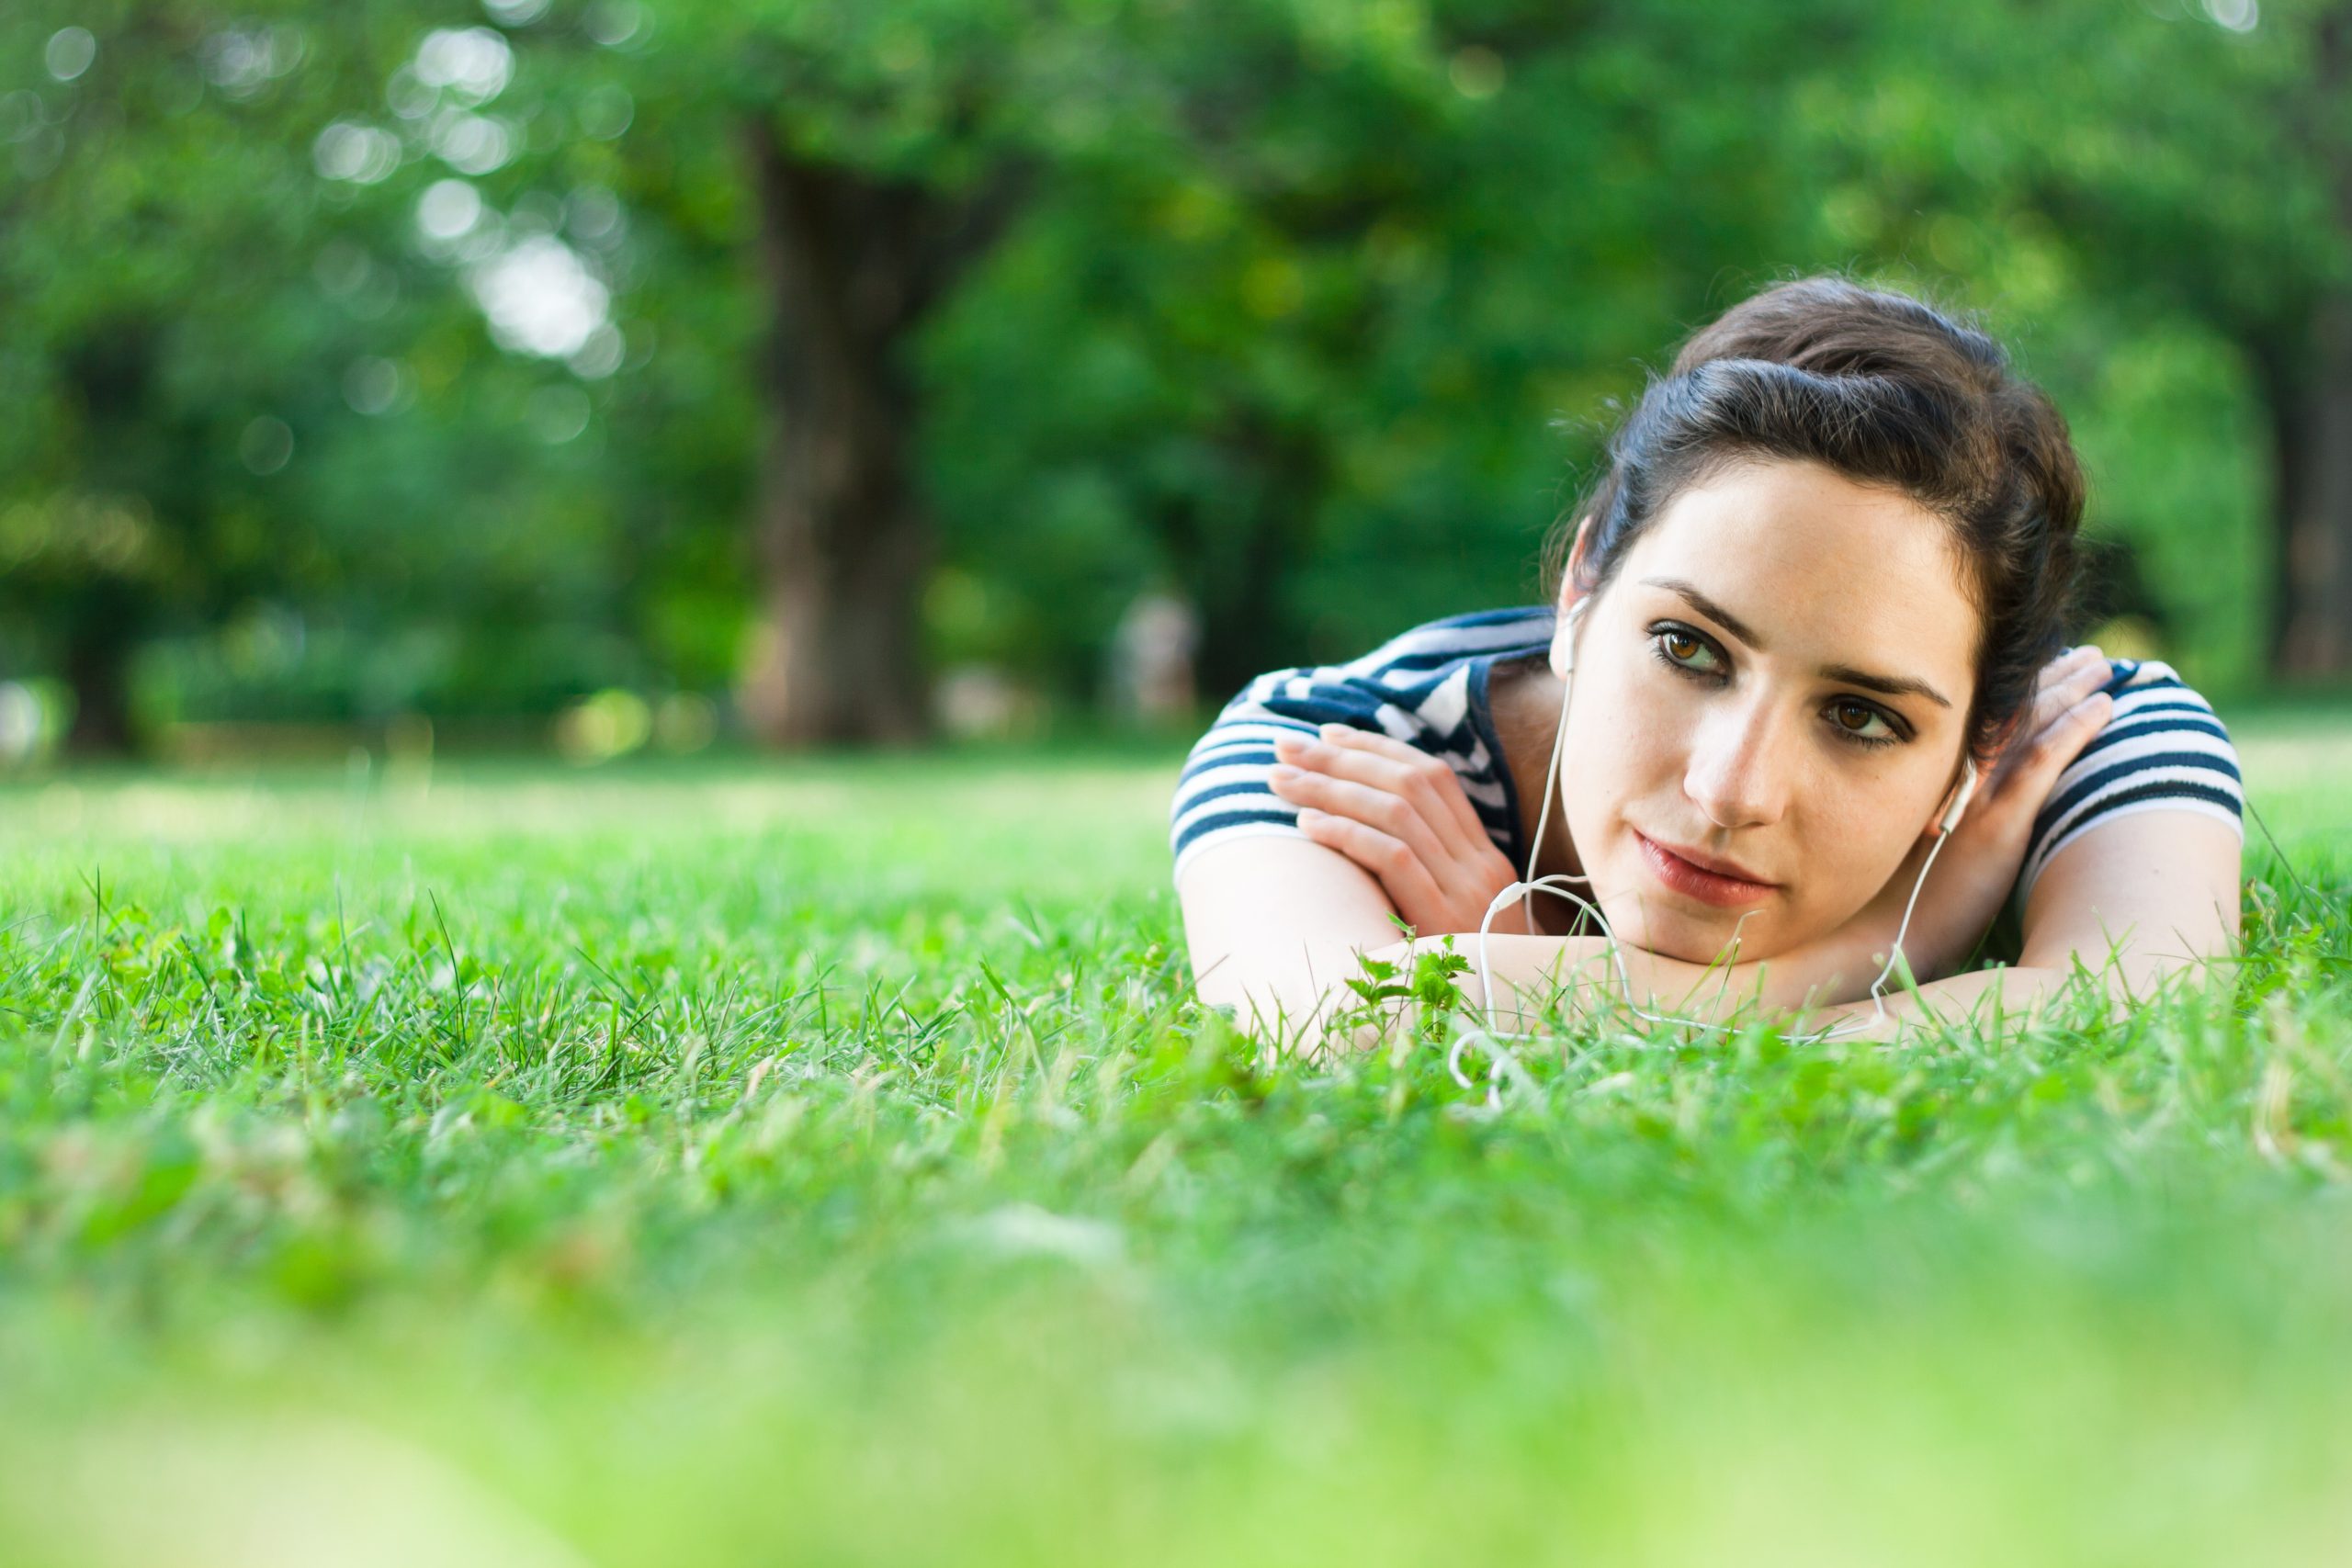 Women wearing headphones and laying in the grass in a park.